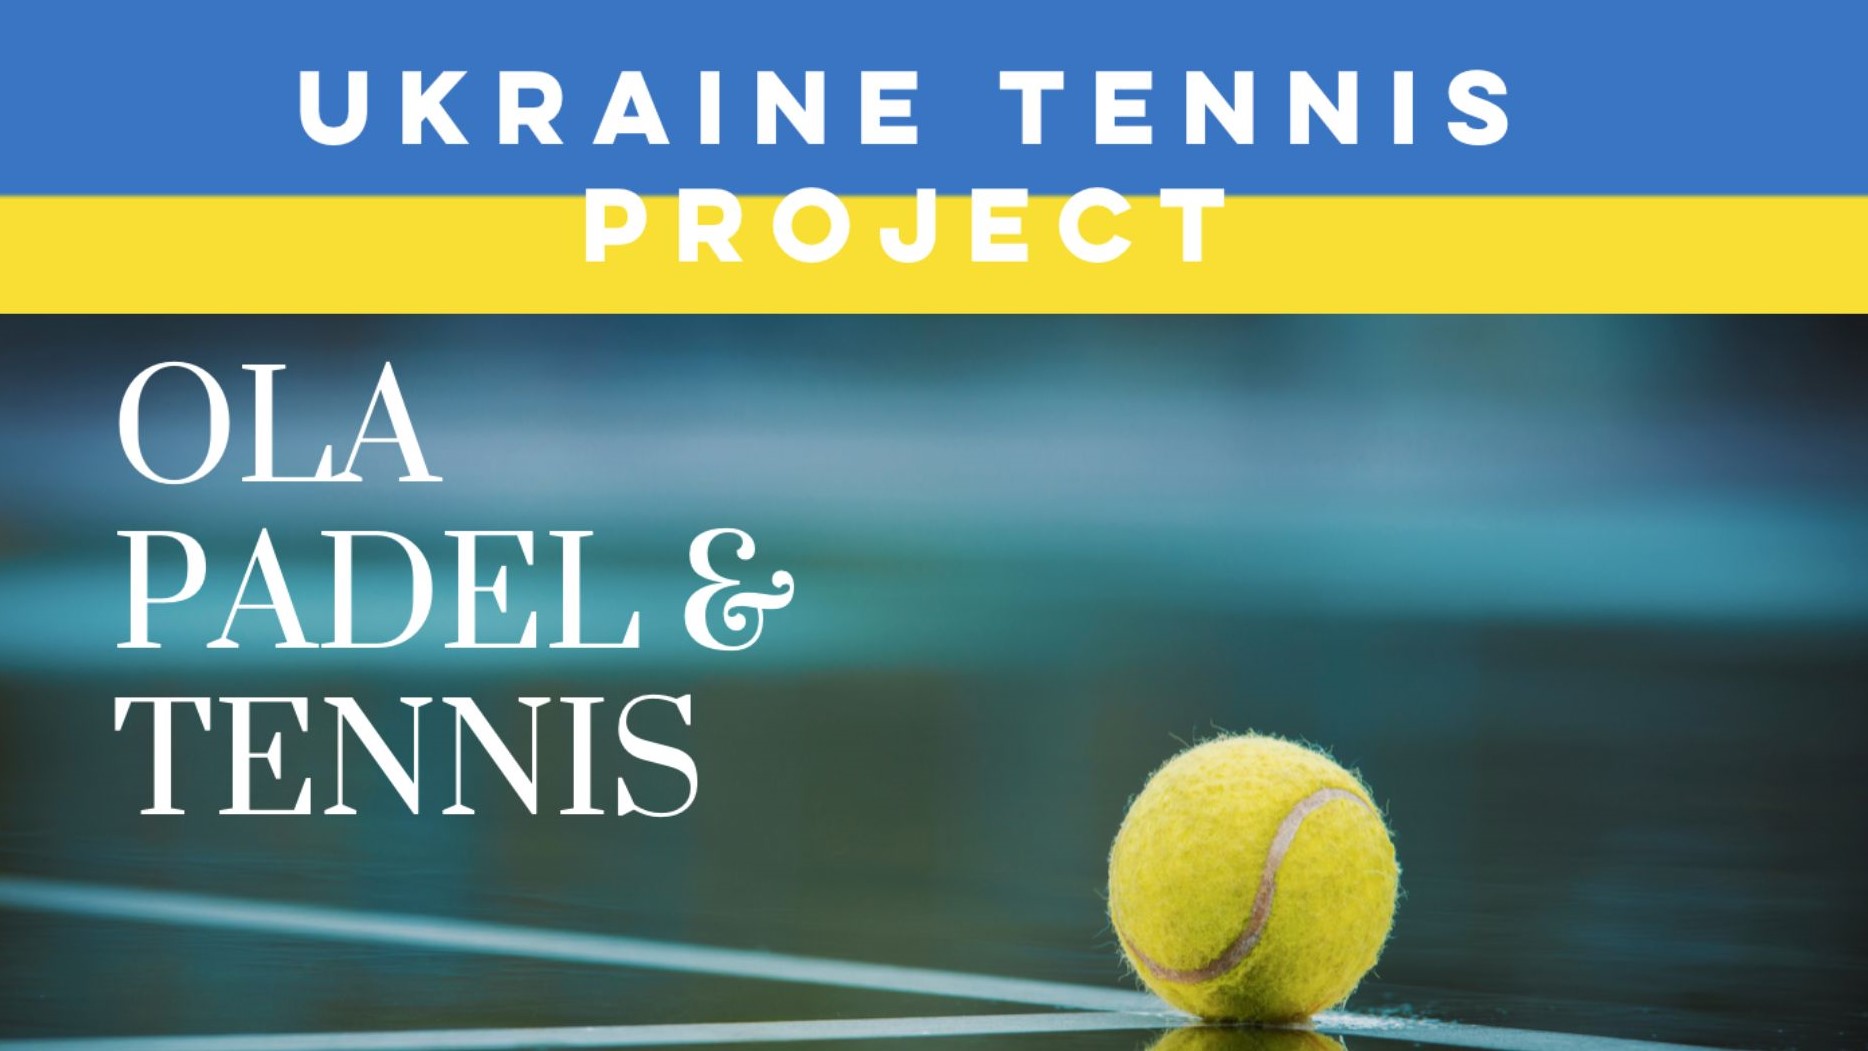 A tournament padel to raise funds for Ukraine